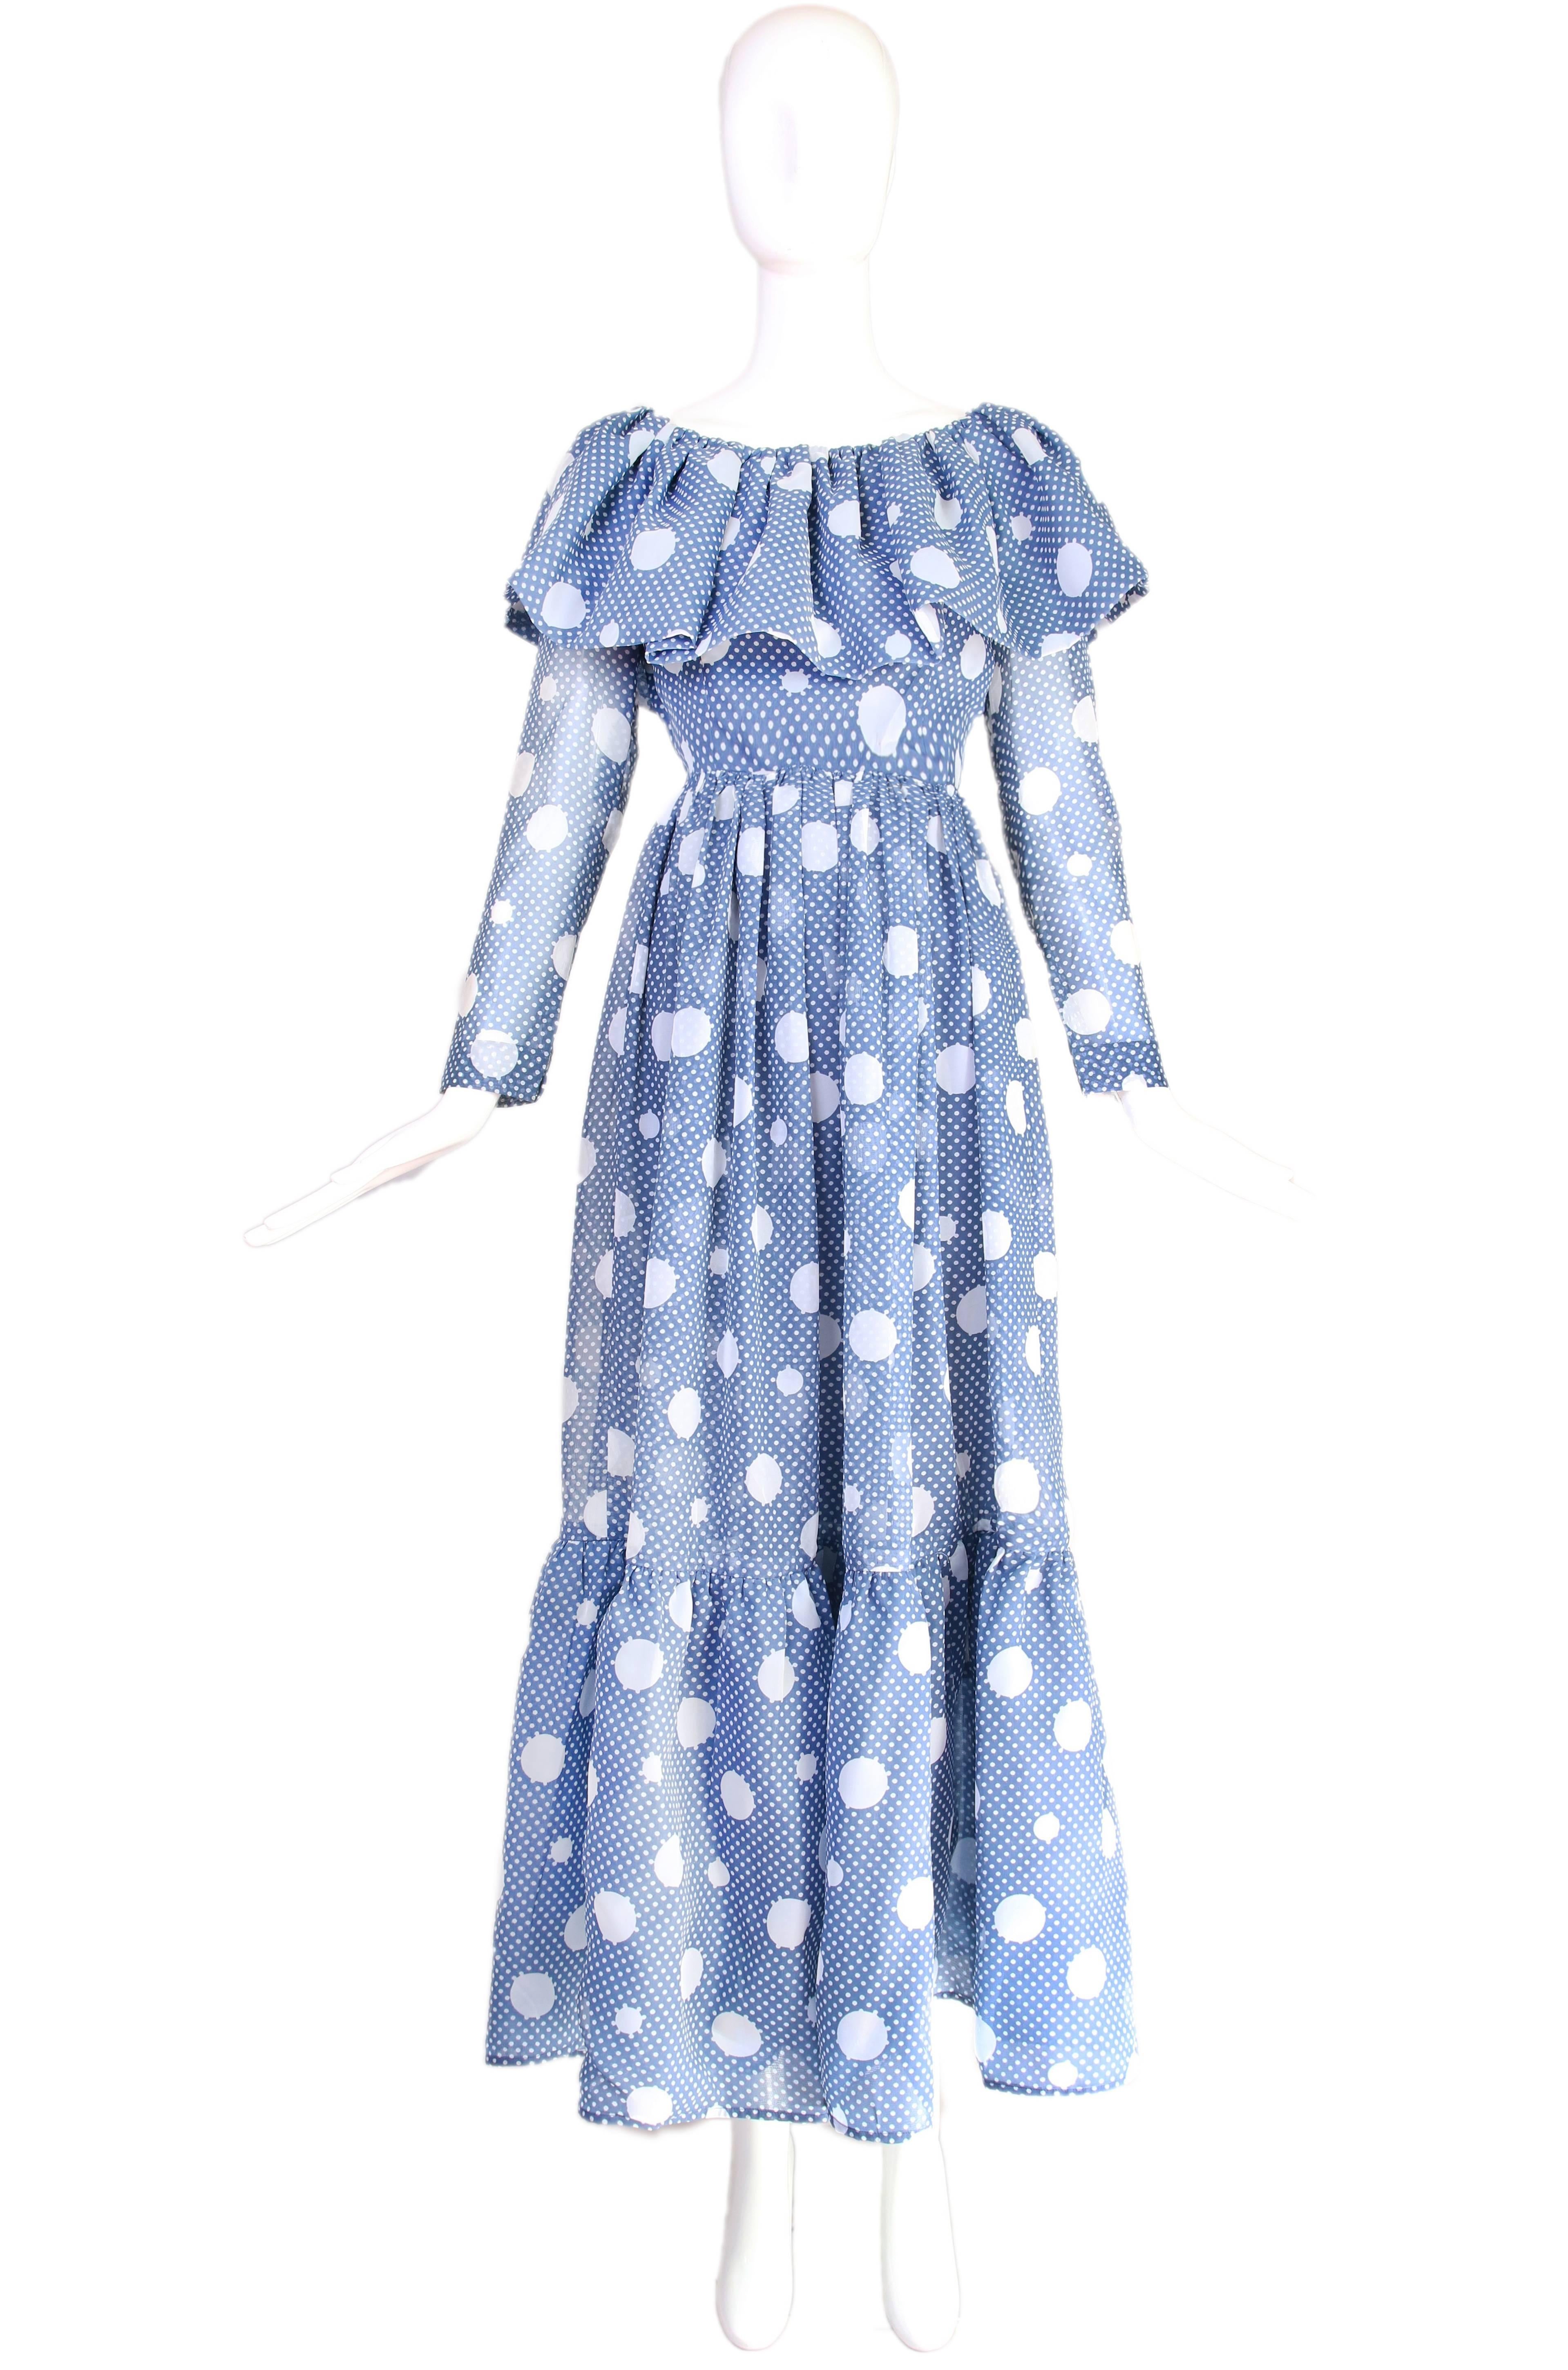 1960's Geoffrey Beene blue & white polka dot tiered maxi dress with oversized ruffled boat neck collar. In excellent condition. No size tag so please consult measurements.
MEASUREMENTS:
Bust - 36"
Waist - 28"
Shoulders - 14